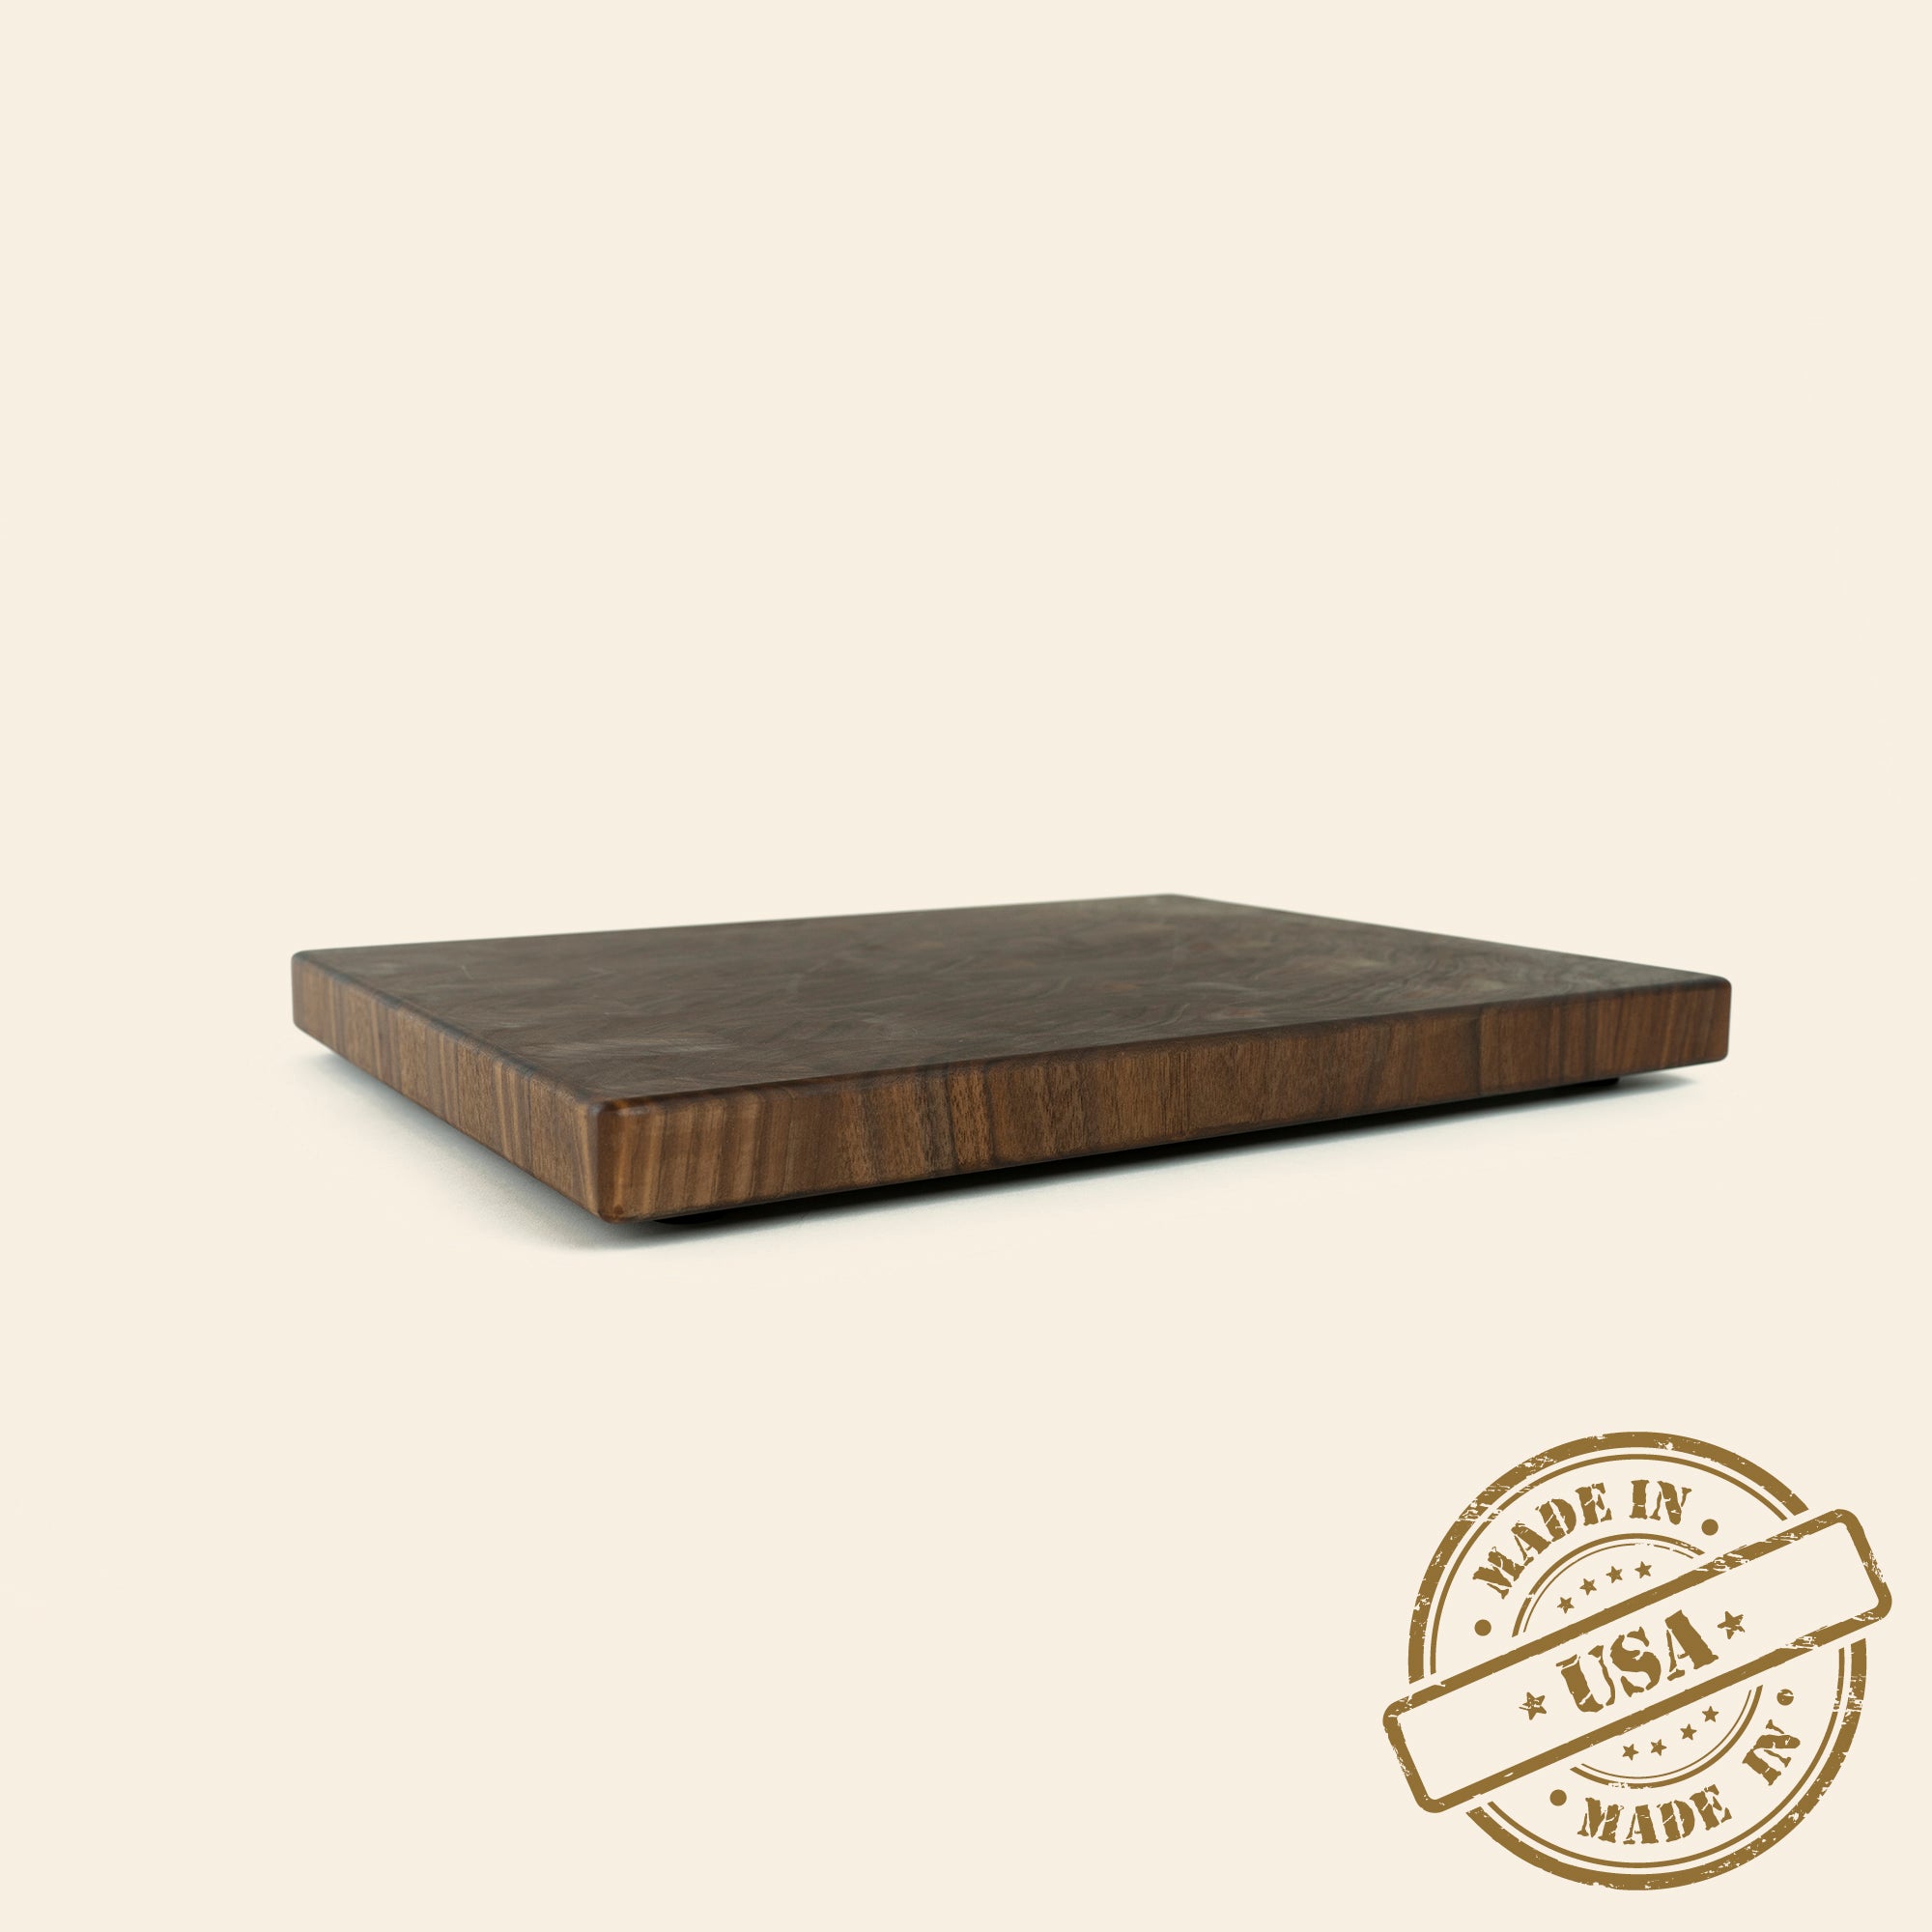 XL Rectangle Walnut Board with Grain on End